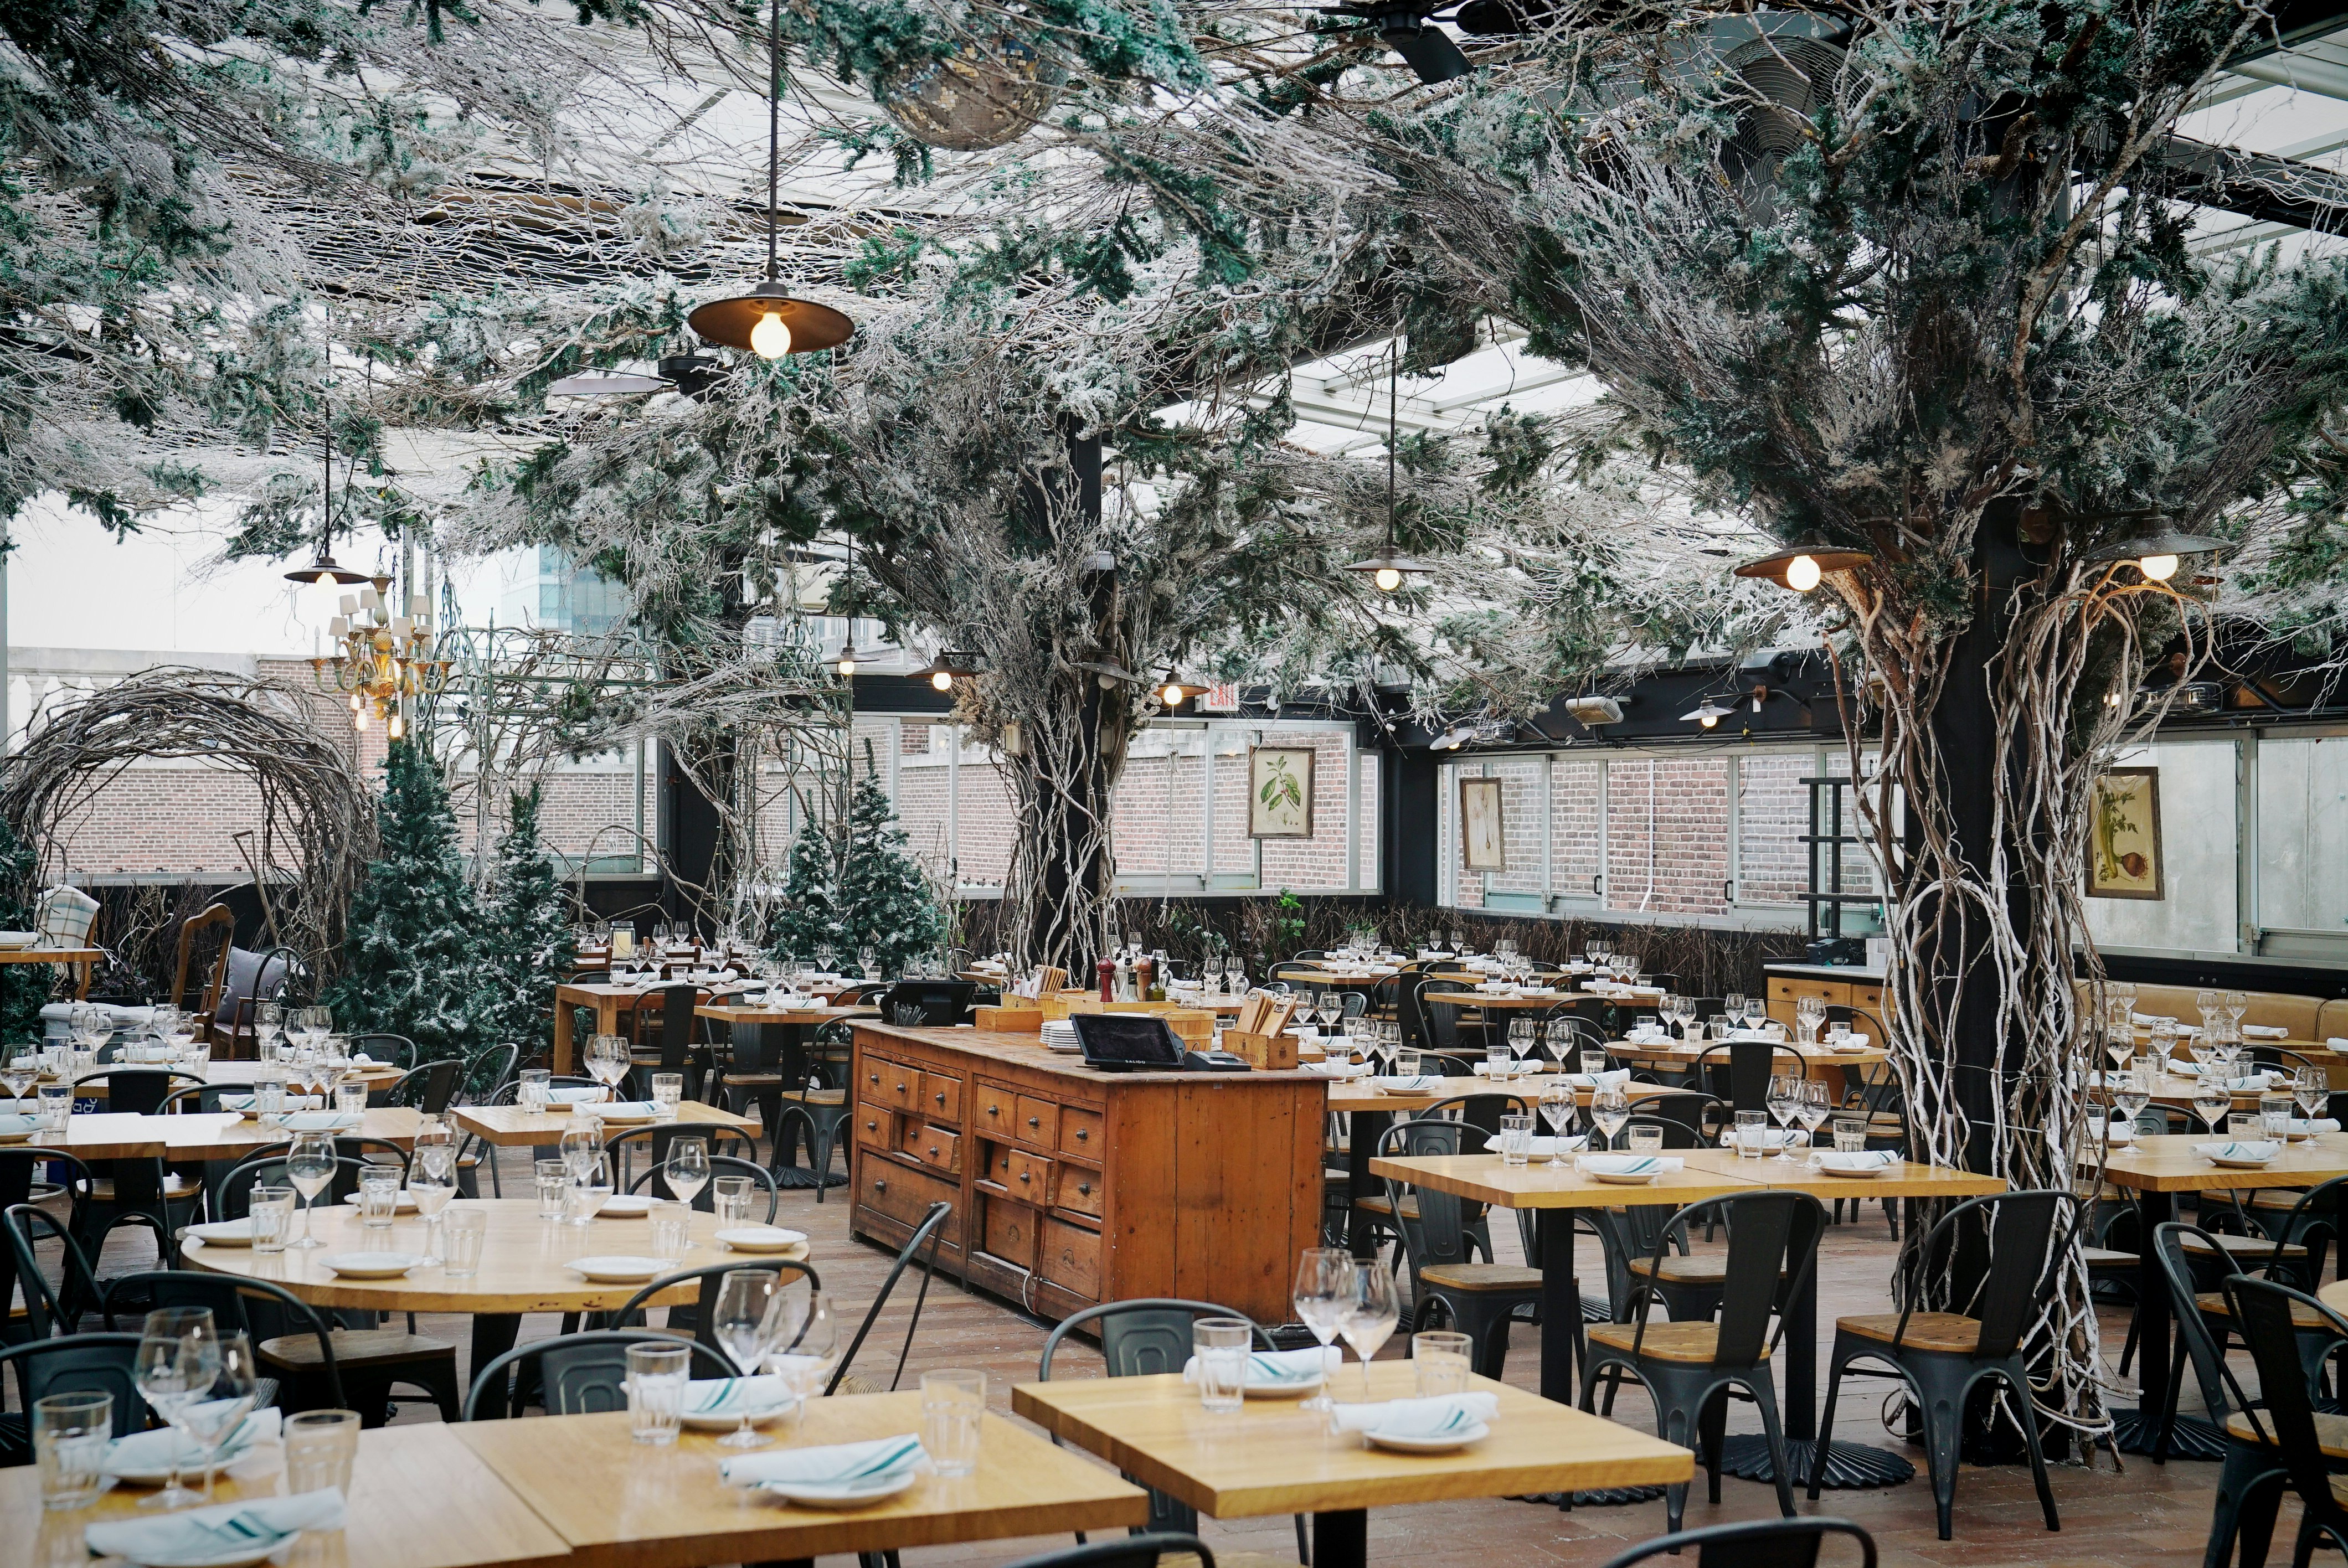 The winter-themed Serra Alpina dining room at Eataly; trees and arbors have been spray-painted white, and there are decorative string lights.